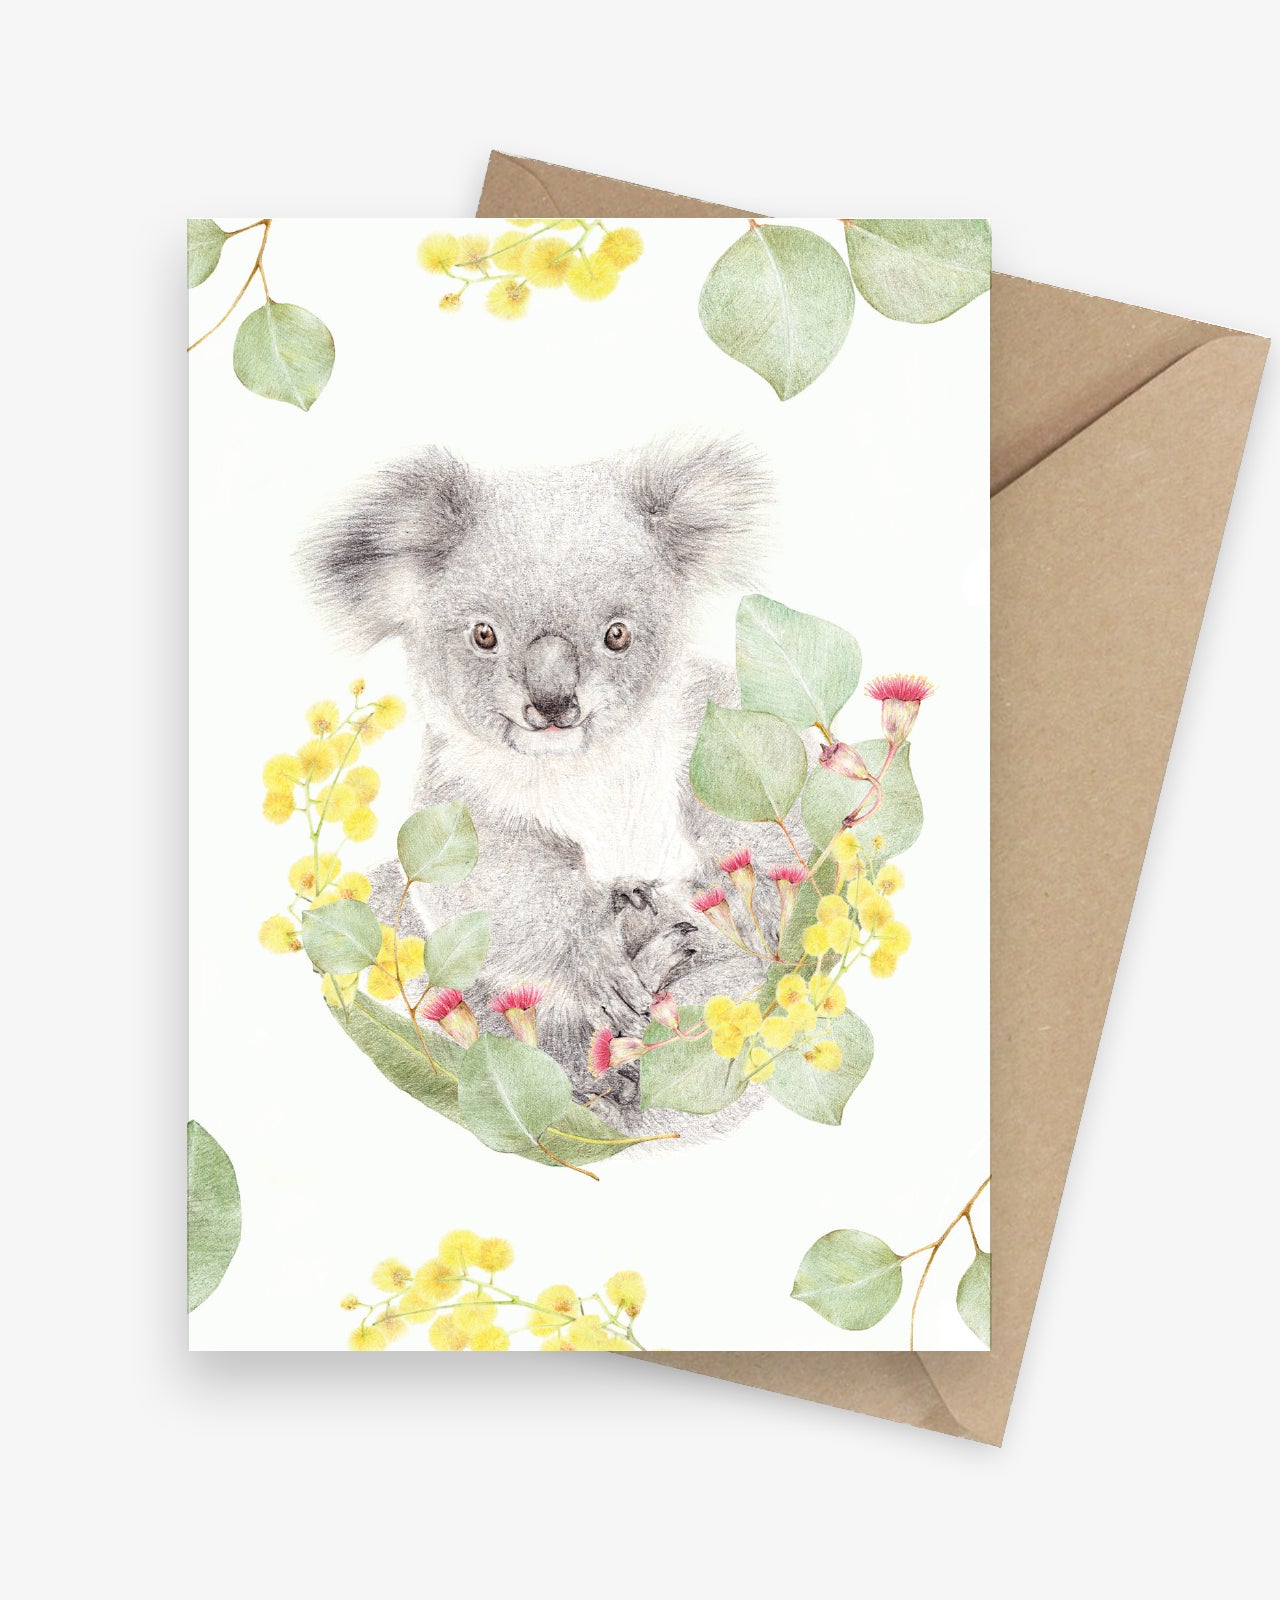 Illustrated greeting card featuring a koala sitting on an Australian native floral wreath.